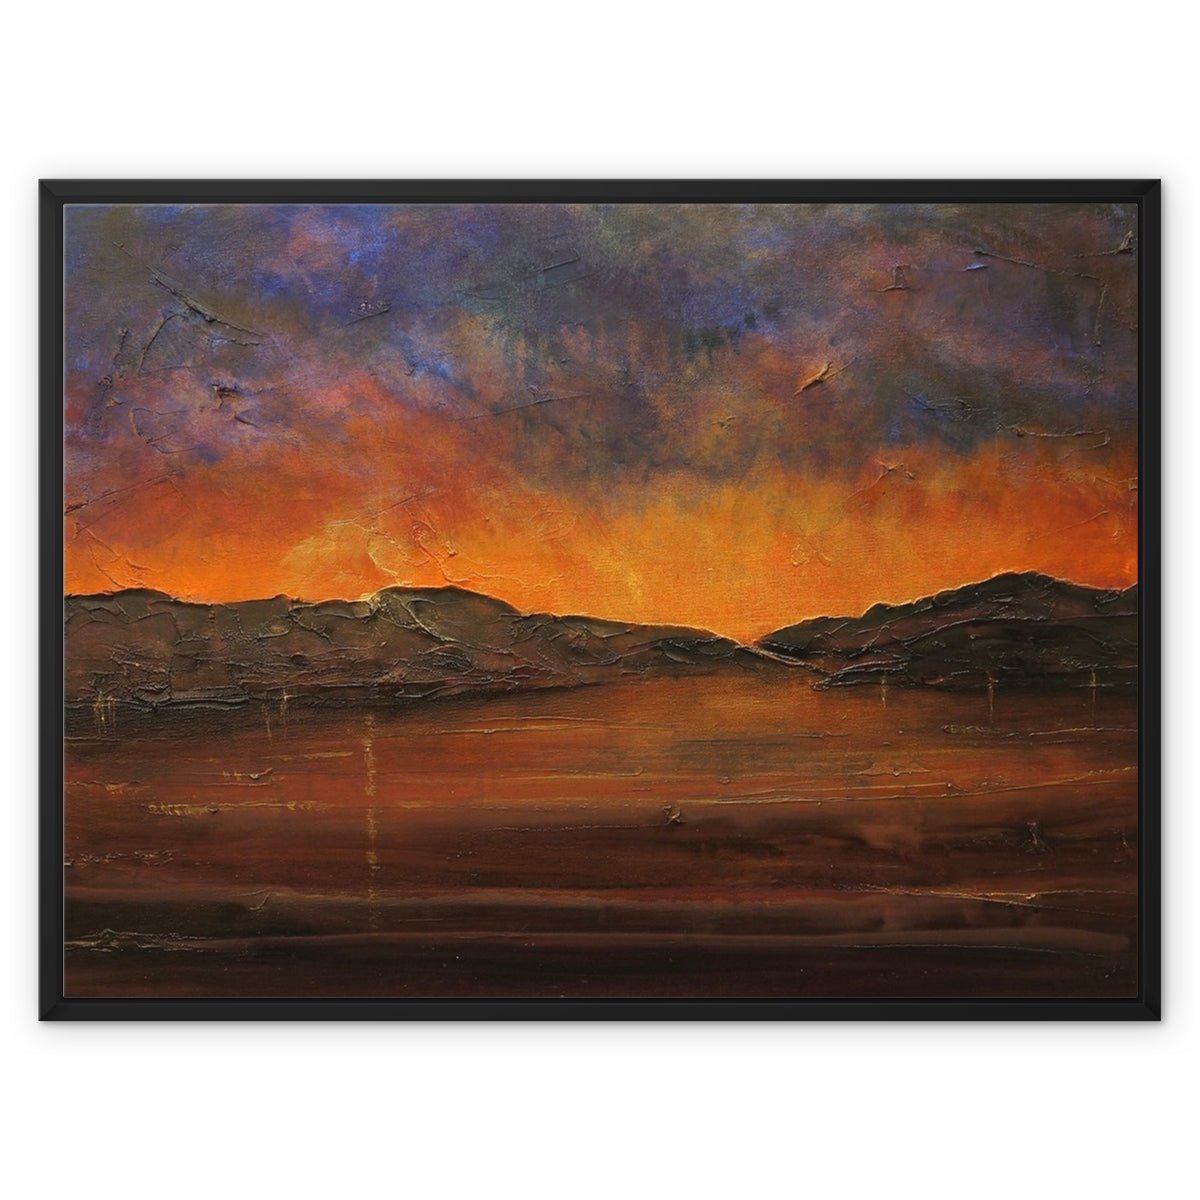 A Brooding River Clyde Dusk Painting | Framed Canvas From Scotland-Floating Framed Canvas Prints-River Clyde Art Gallery-32"x24"-Black Frame-Paintings, Prints, Homeware, Art Gifts From Scotland By Scottish Artist Kevin Hunter